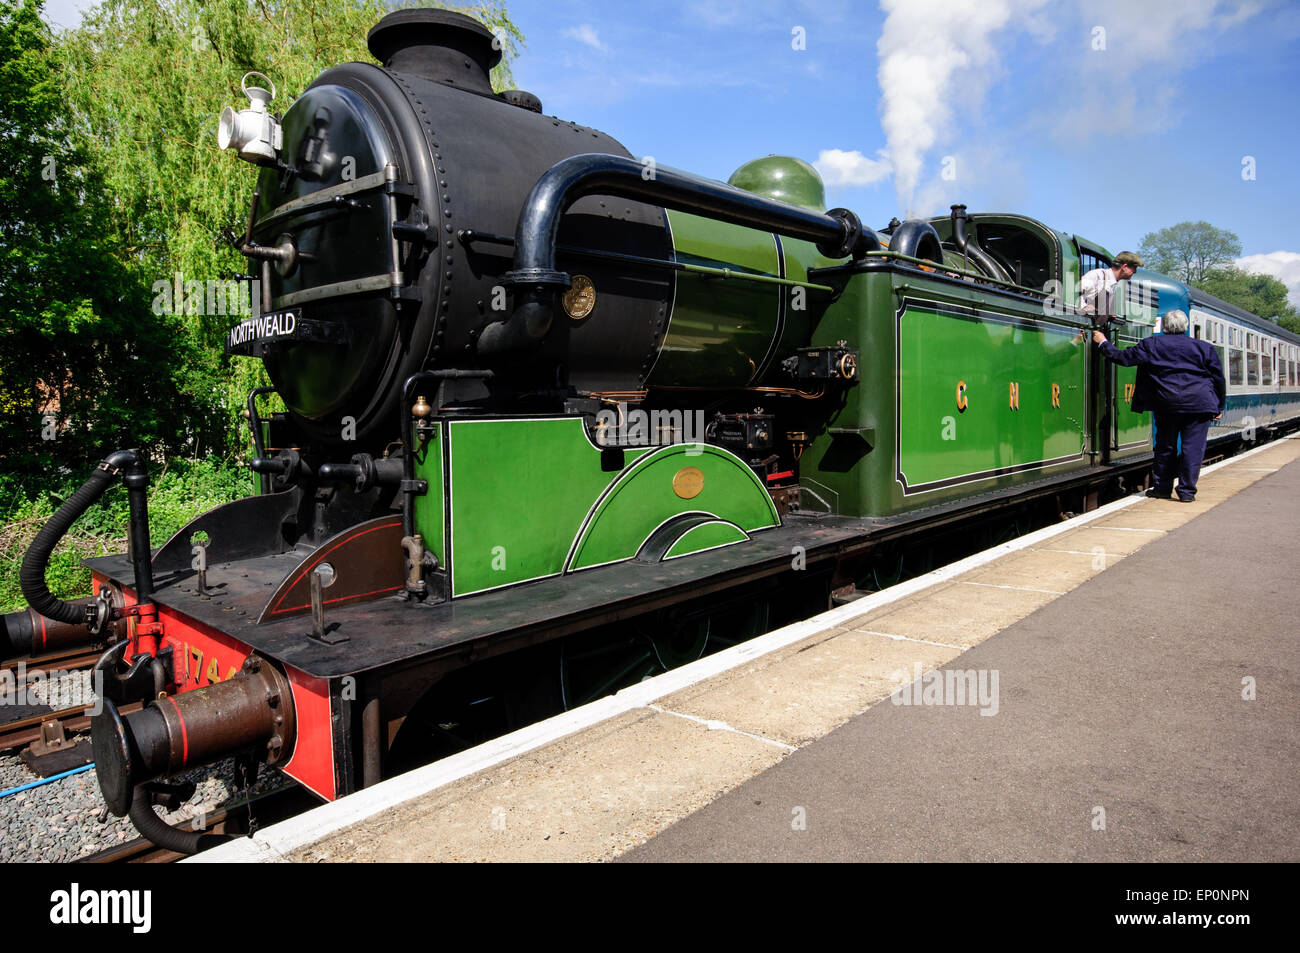 A historic train in Ongar station. Epping-Ongar railway attraction in Essex. Stock Photo